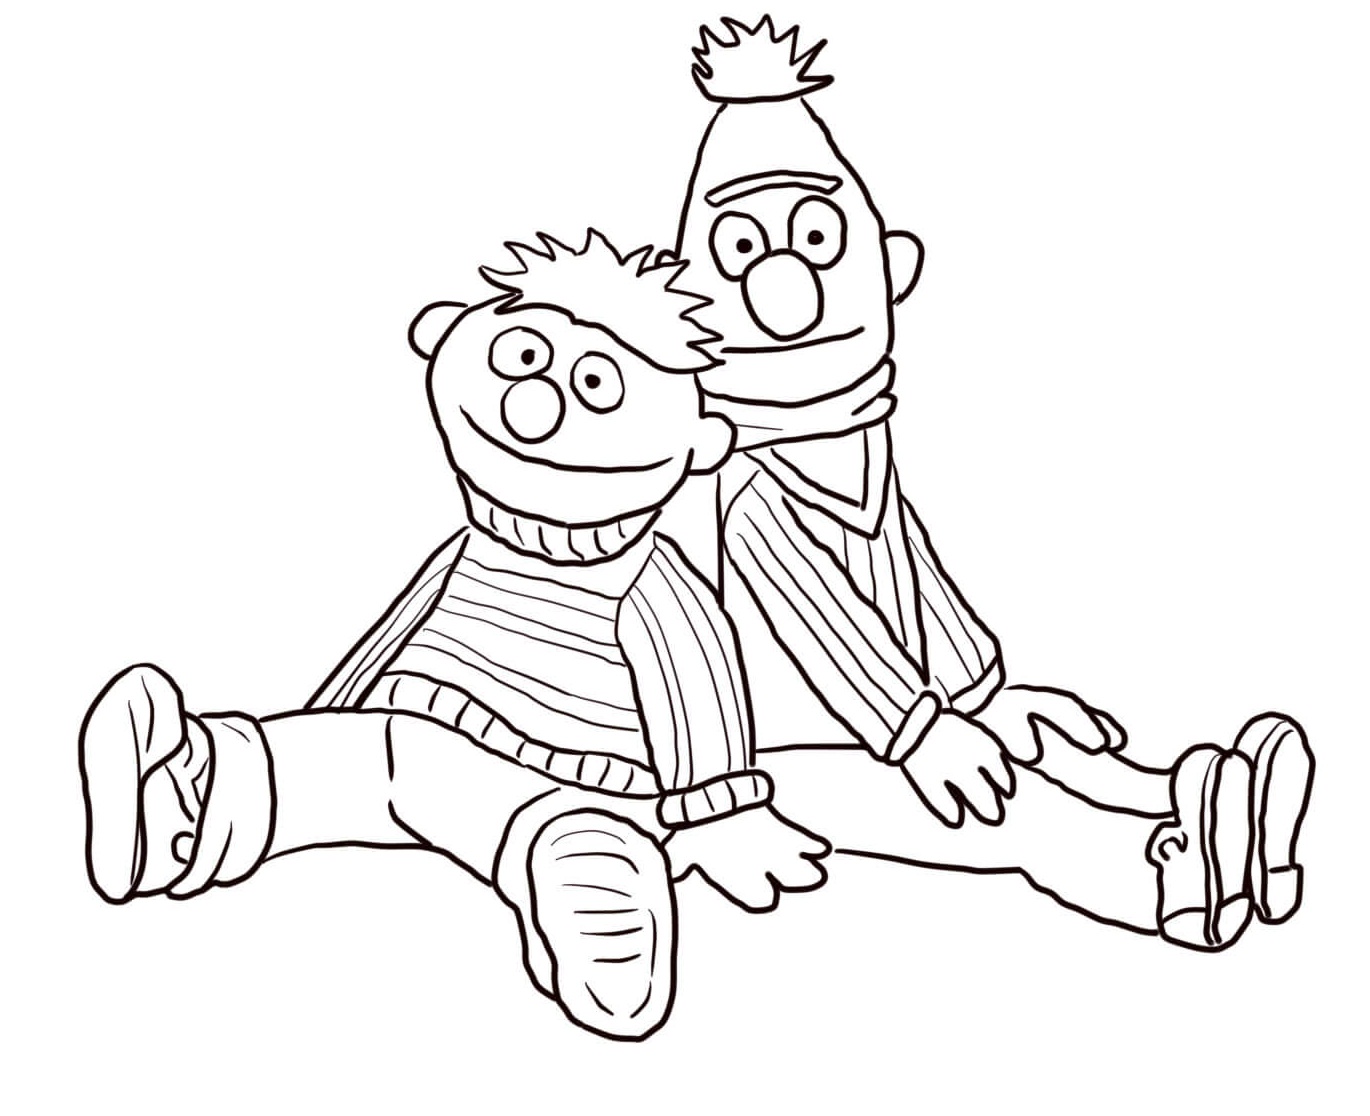 Bert And Ernie Sitting Coloring Page - Free Printable Coloring Pages